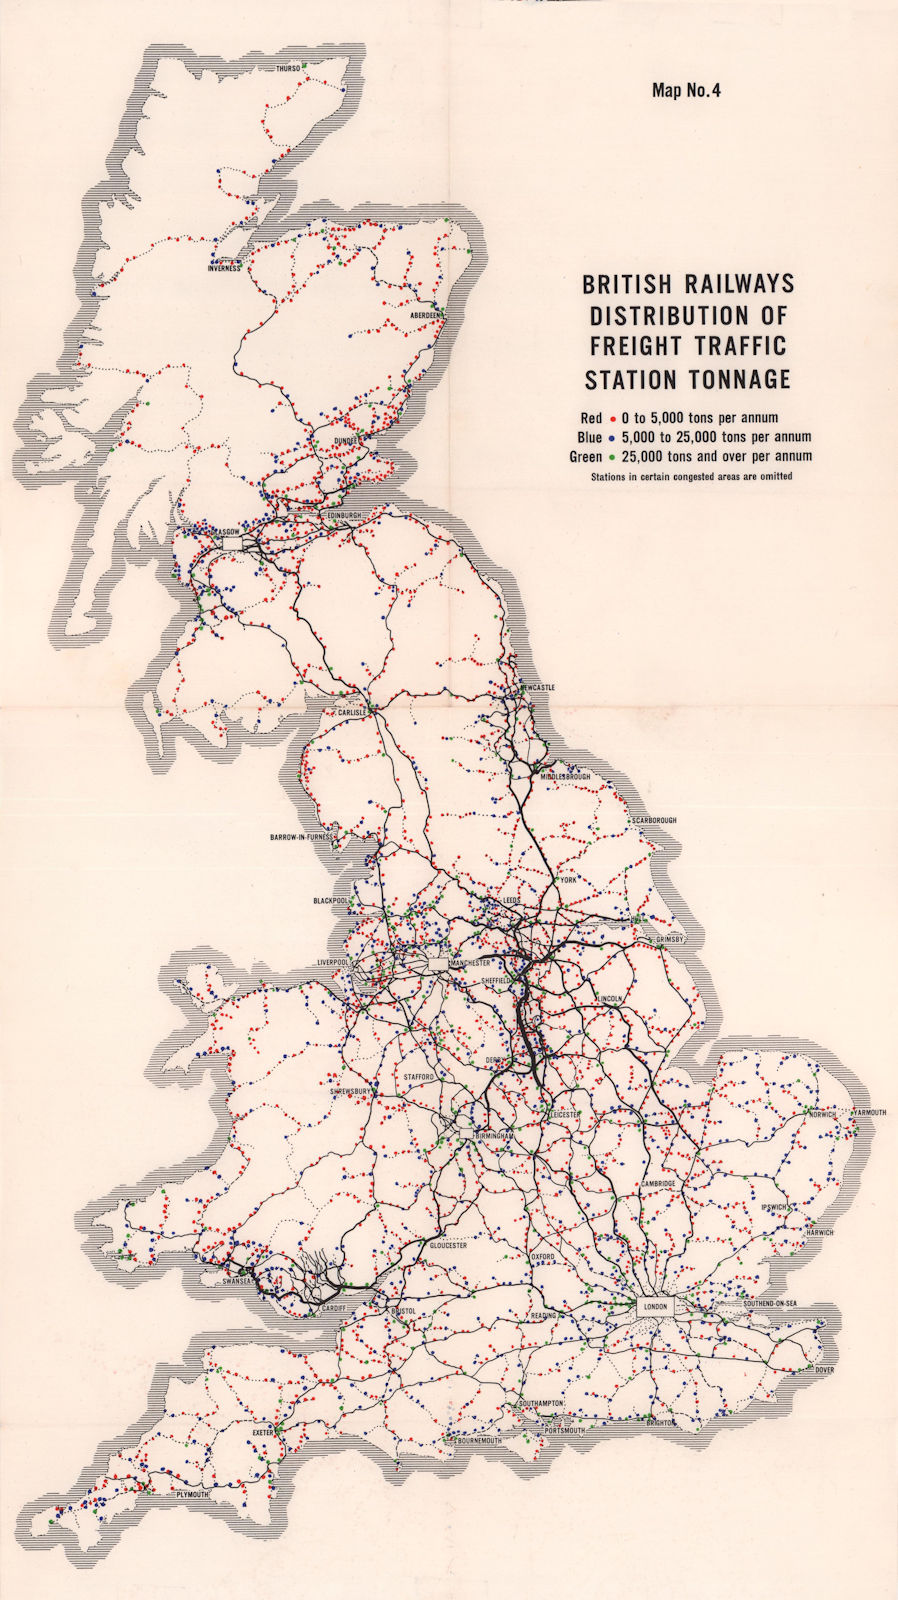 Associate Product British Railways freight traffic station tonnage. BEECHING REPORT 1963 old map